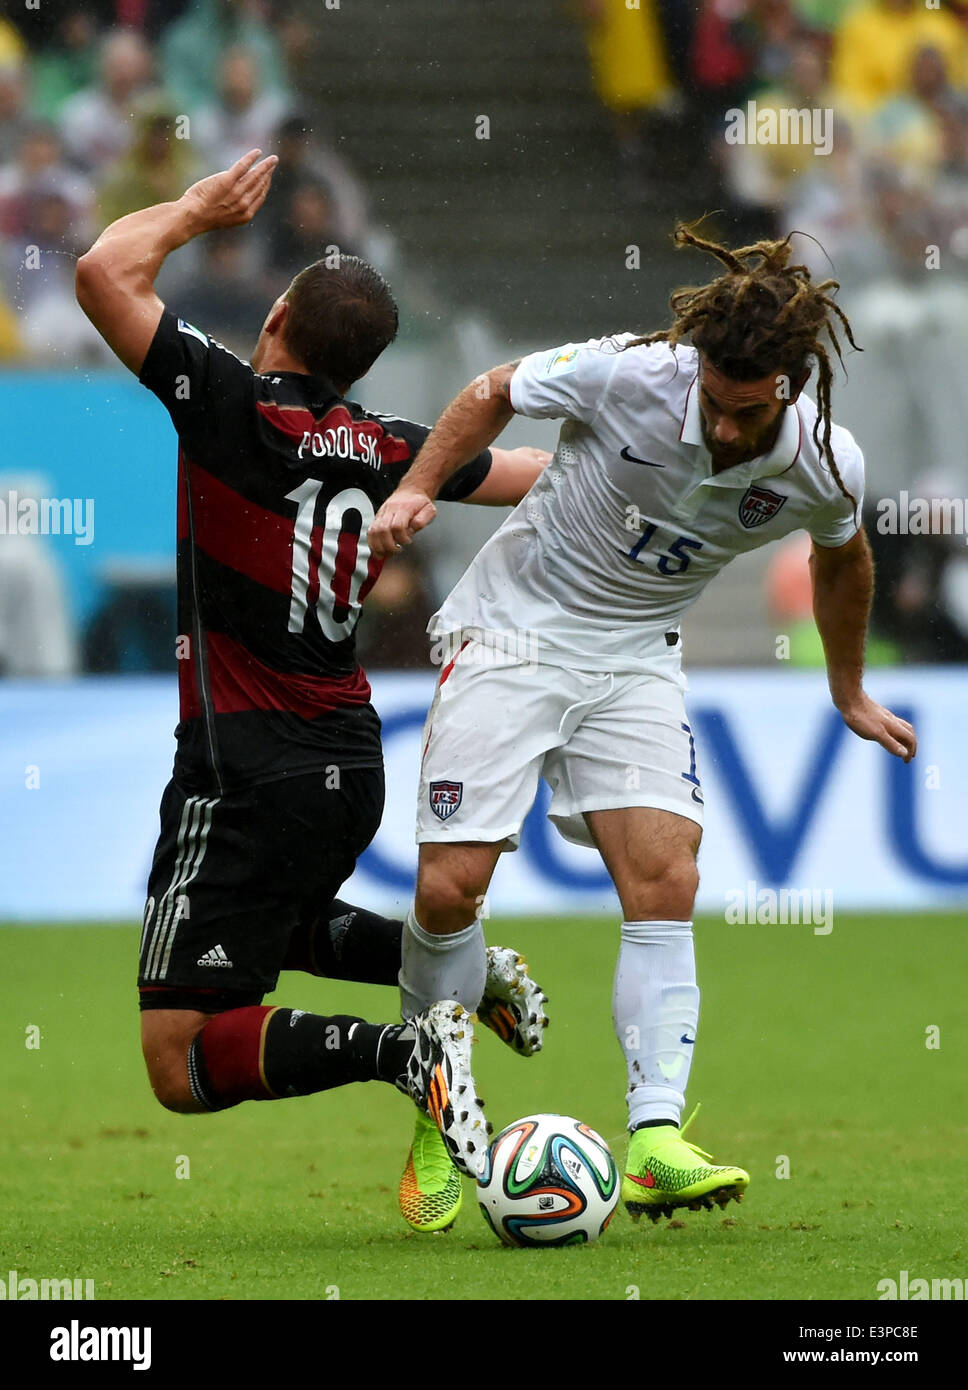 Recife, Brazil. 26th June, 2014. Germany's Lukas Podolski (L) vies with Kyle Beckerman of the U.S. during a Group G match between the U.S. and Germany of 2014 FIFA World Cup at the Arena Pernambuco Stadium in Recife, Brazil, on June 26, 2014. Credit:  Guo Yong/Xinhua/Alamy Live News Stock Photo